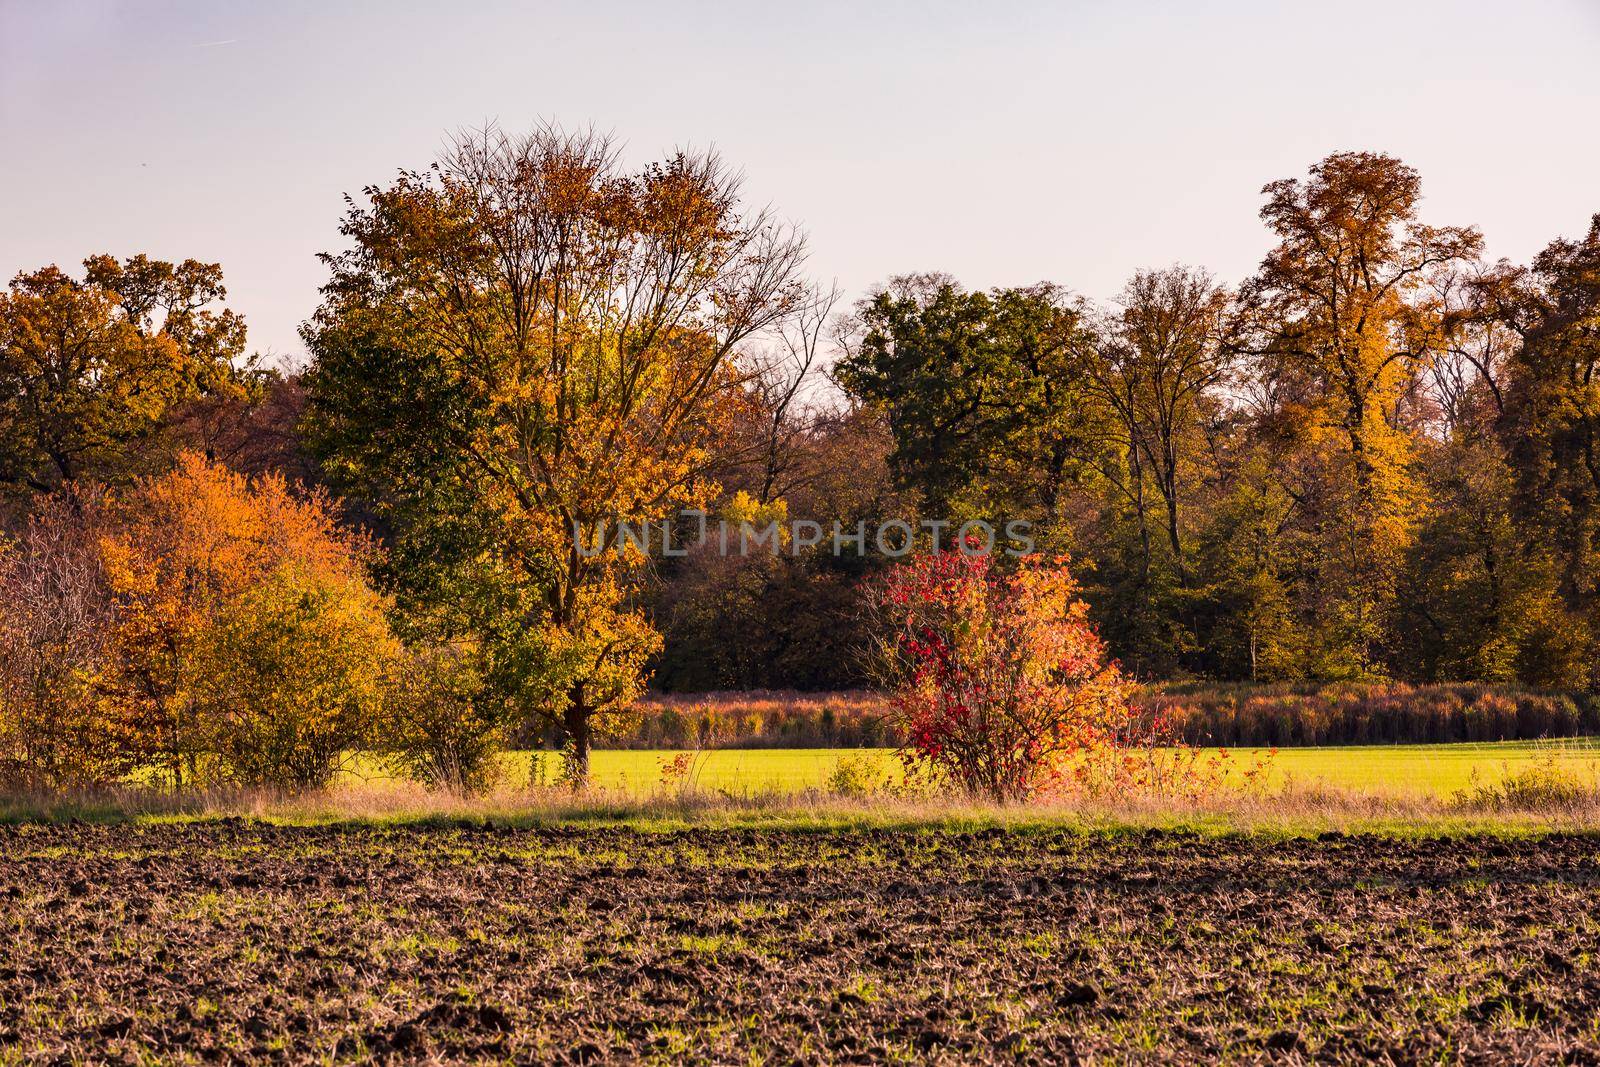 The lonely nature with many colored leaves on the ground in an autumn mood in Germany